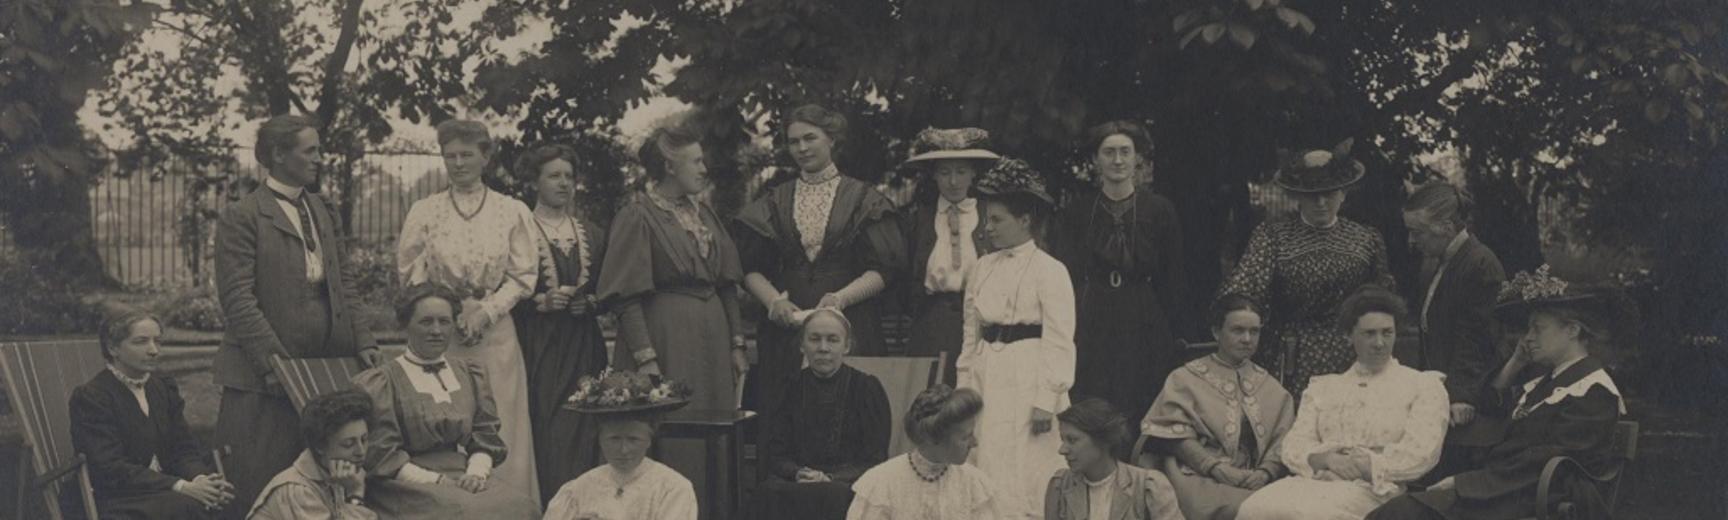 Staff at Newnham College (1907), with Igerna Sollas sitting on the grass on the far right.